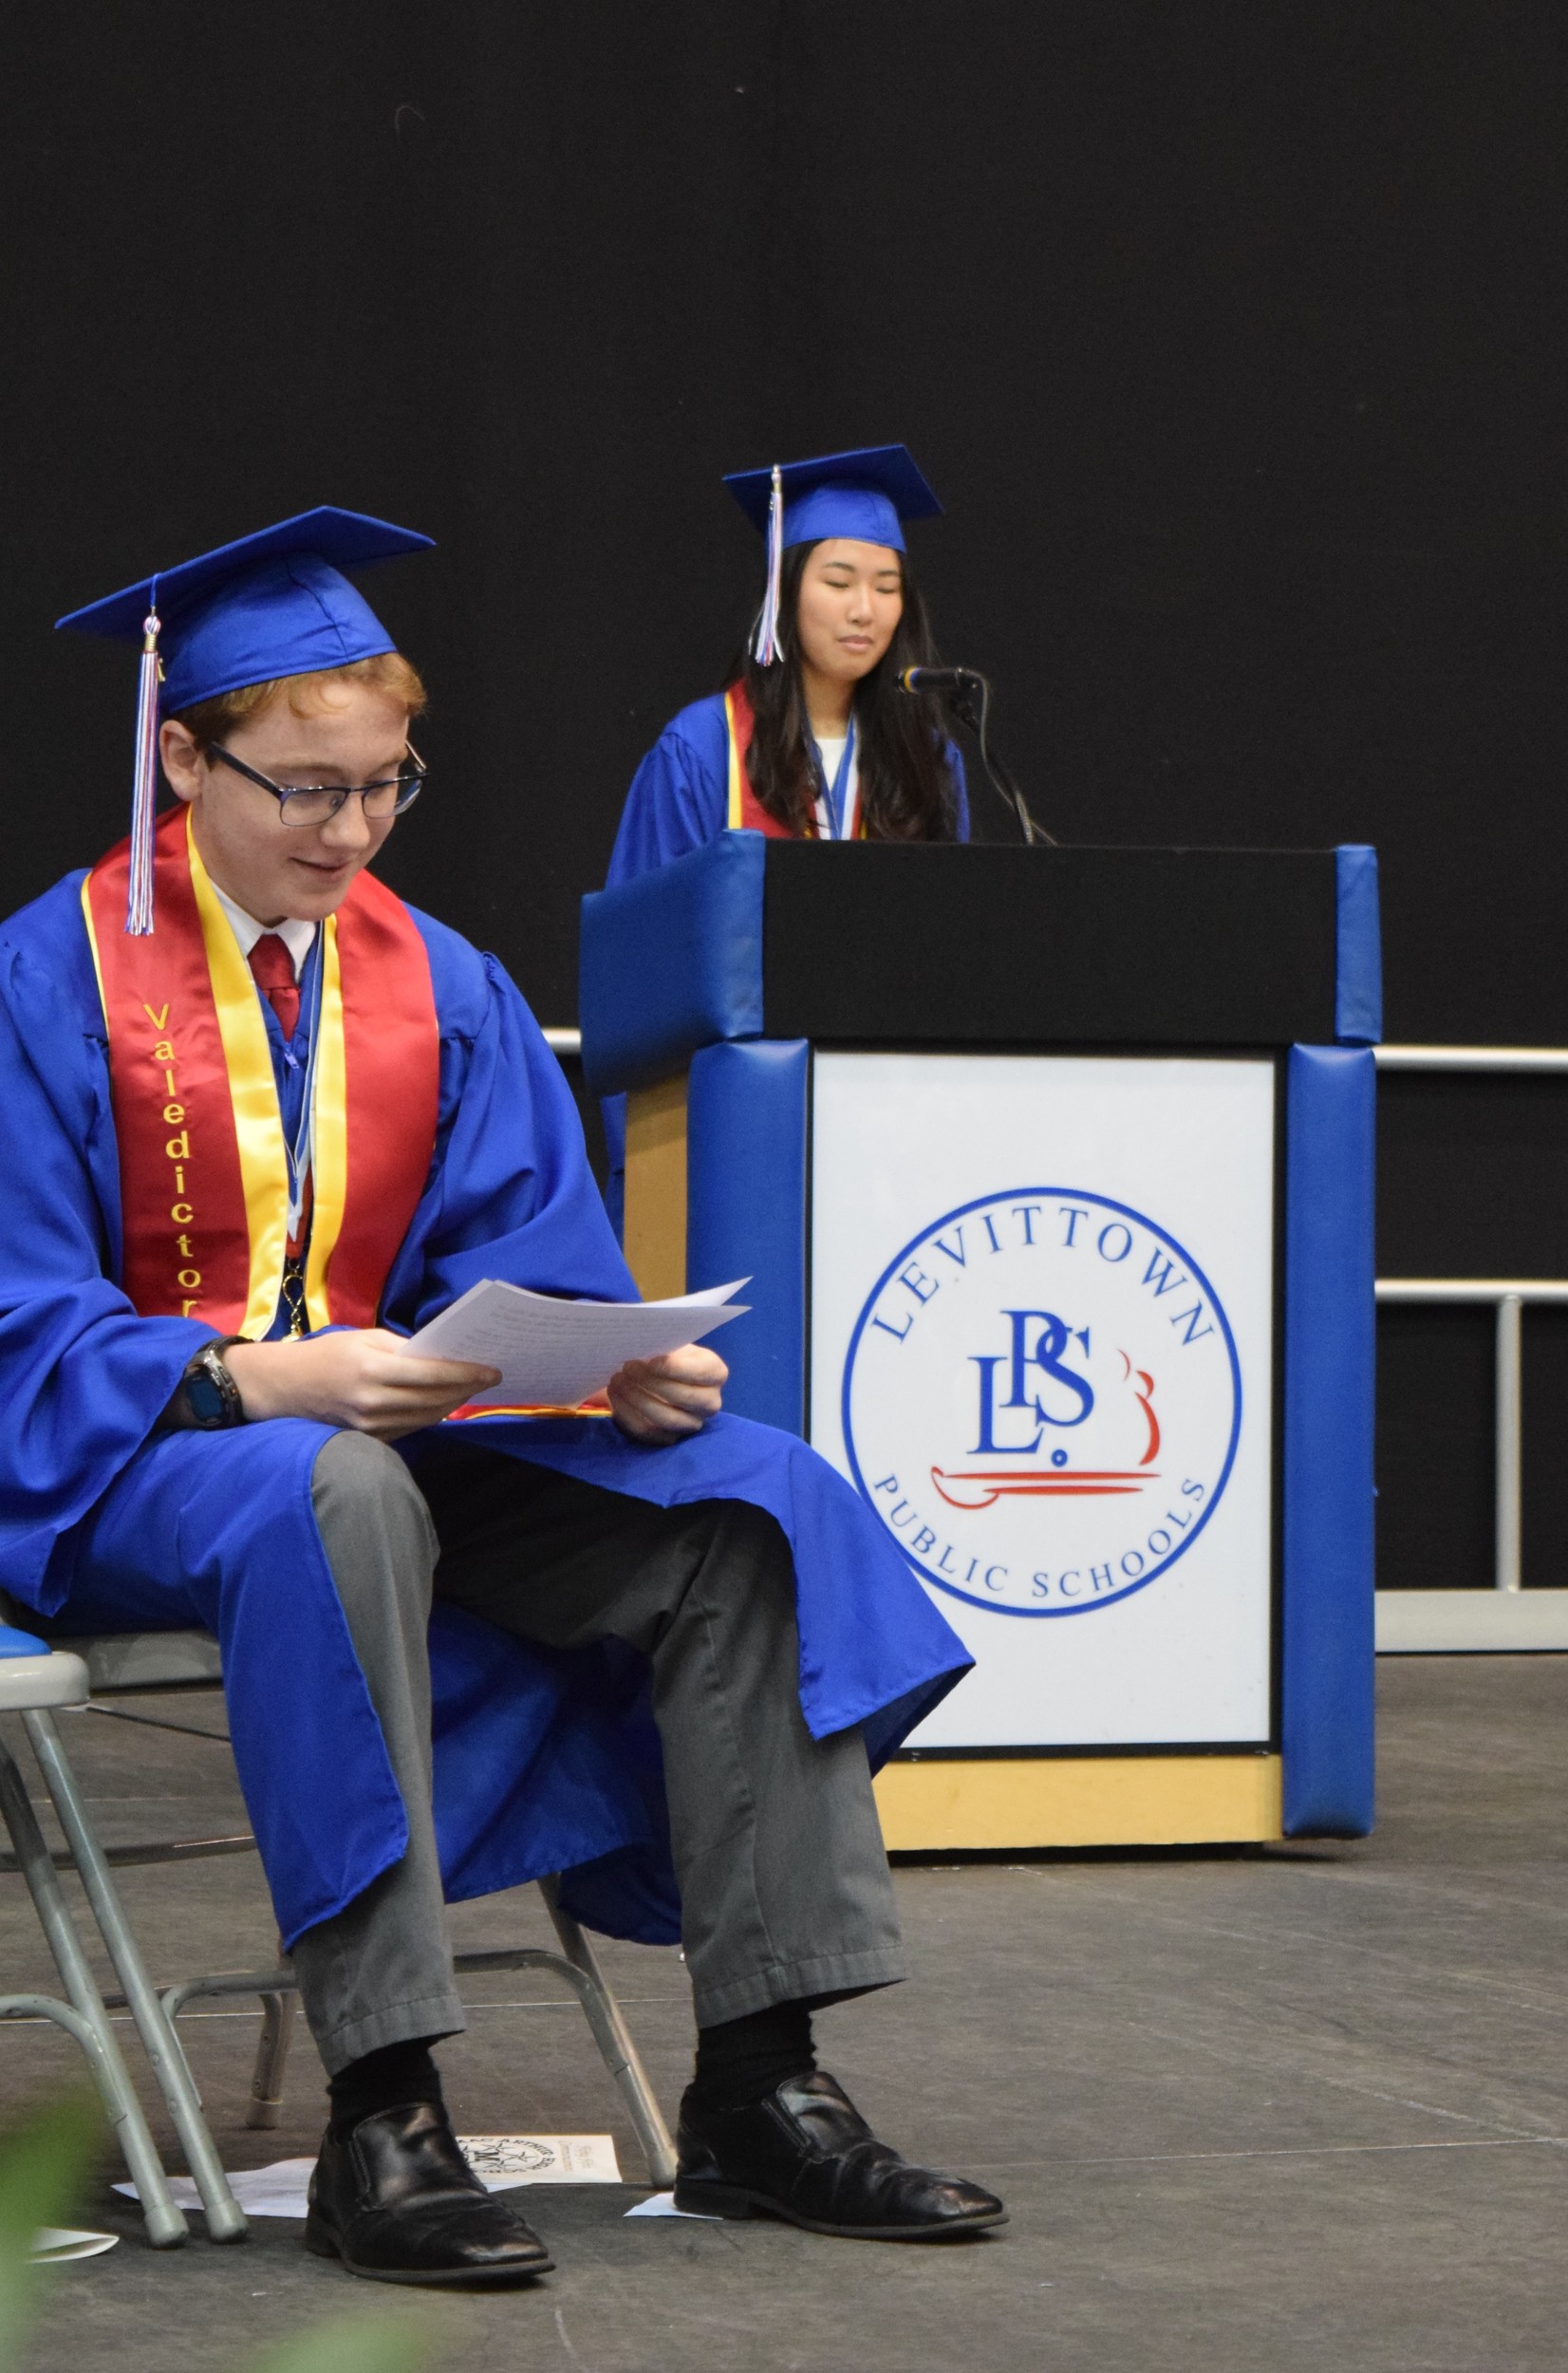 Valedictorian Gregory Matousek, who will be attending Stony Brook University and Salutatorian Ashley Kim, who will be attending Brown University, made remarks to their fellow graduates.